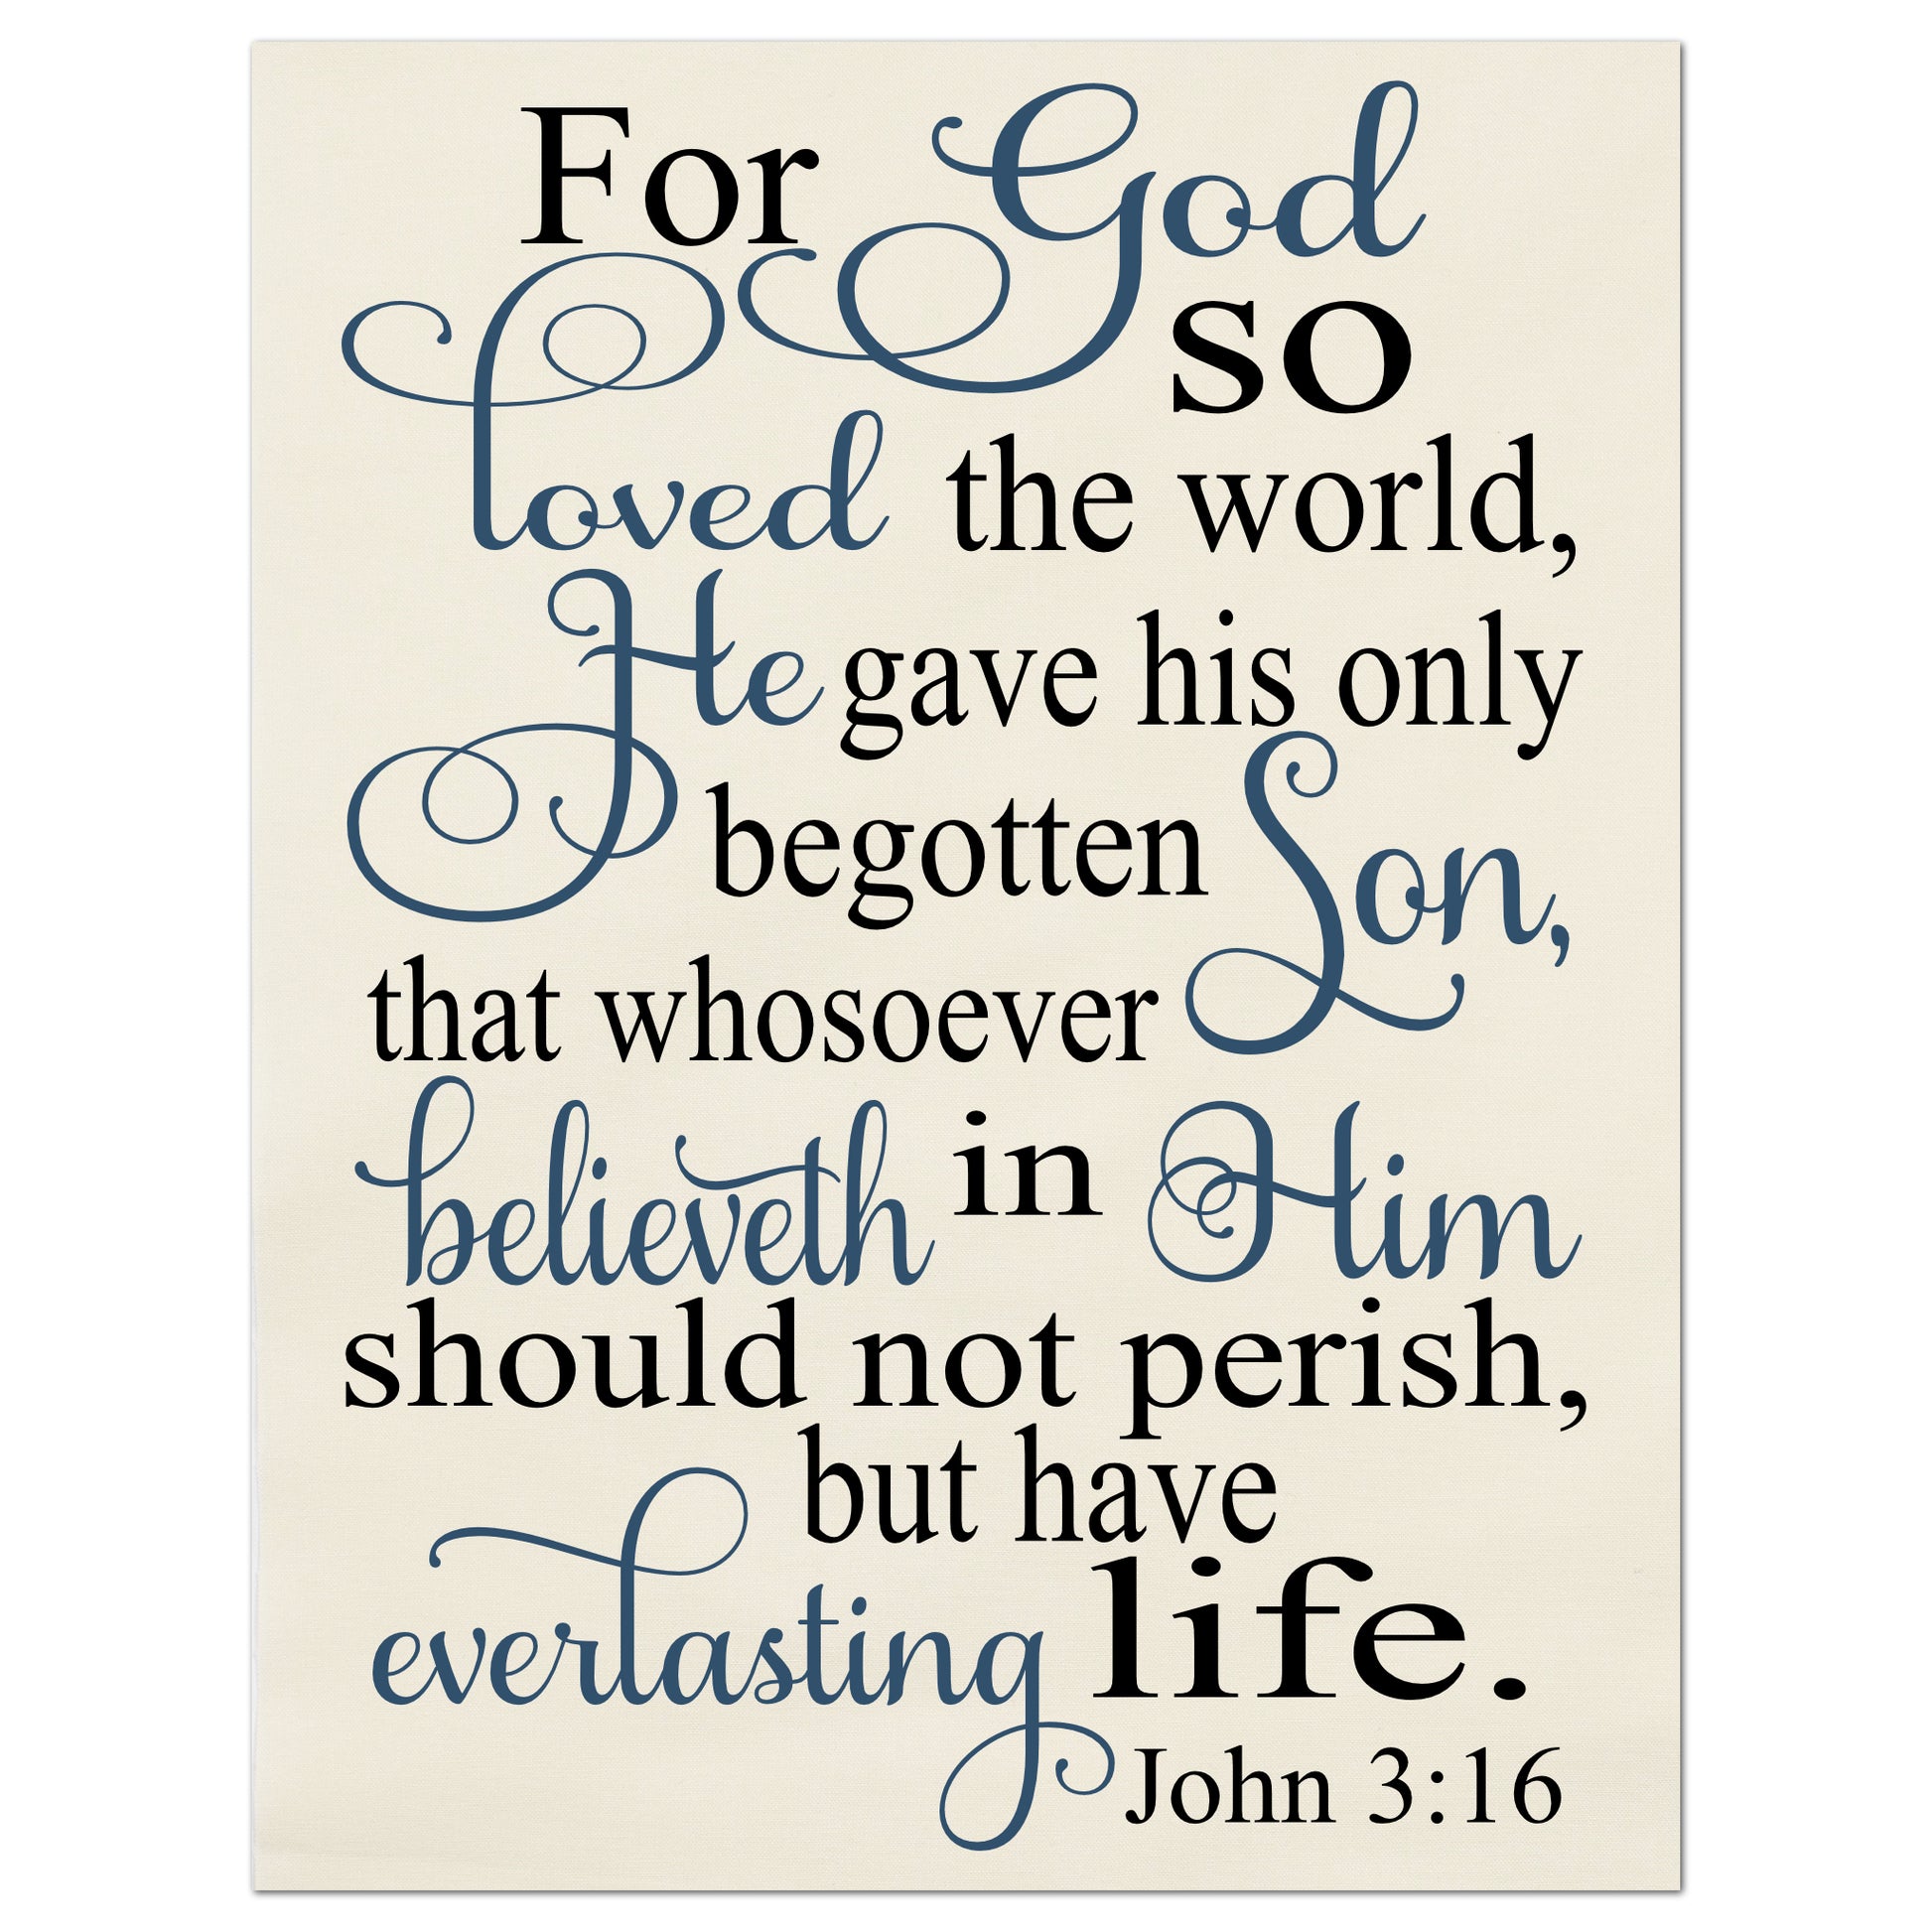 For God so loved the world, He gave his only begotten Son, that whosoever believeth in Him should not perish, but have everlasting life.  John 3:16, Fabric Panel Print, Wall Hanging, Quilt Block